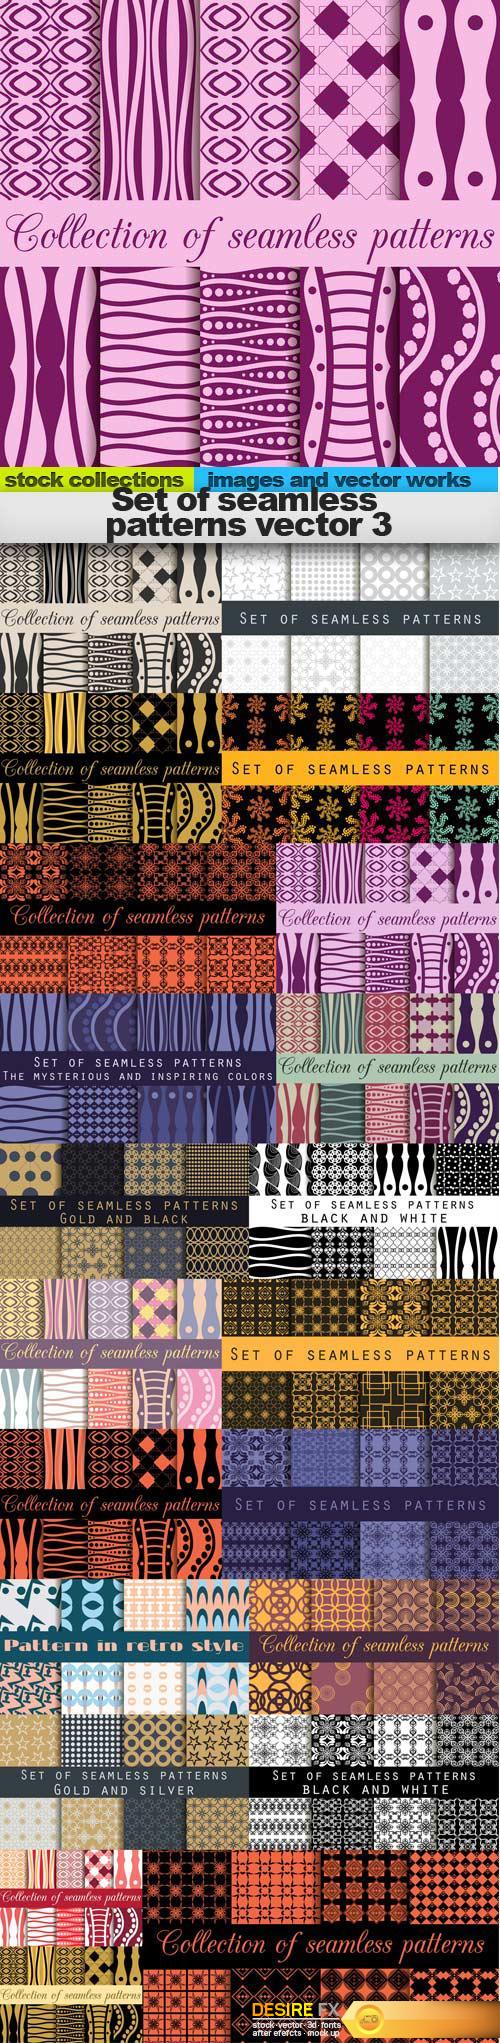 Set of seamless patterns vector 3, 15 x EPS